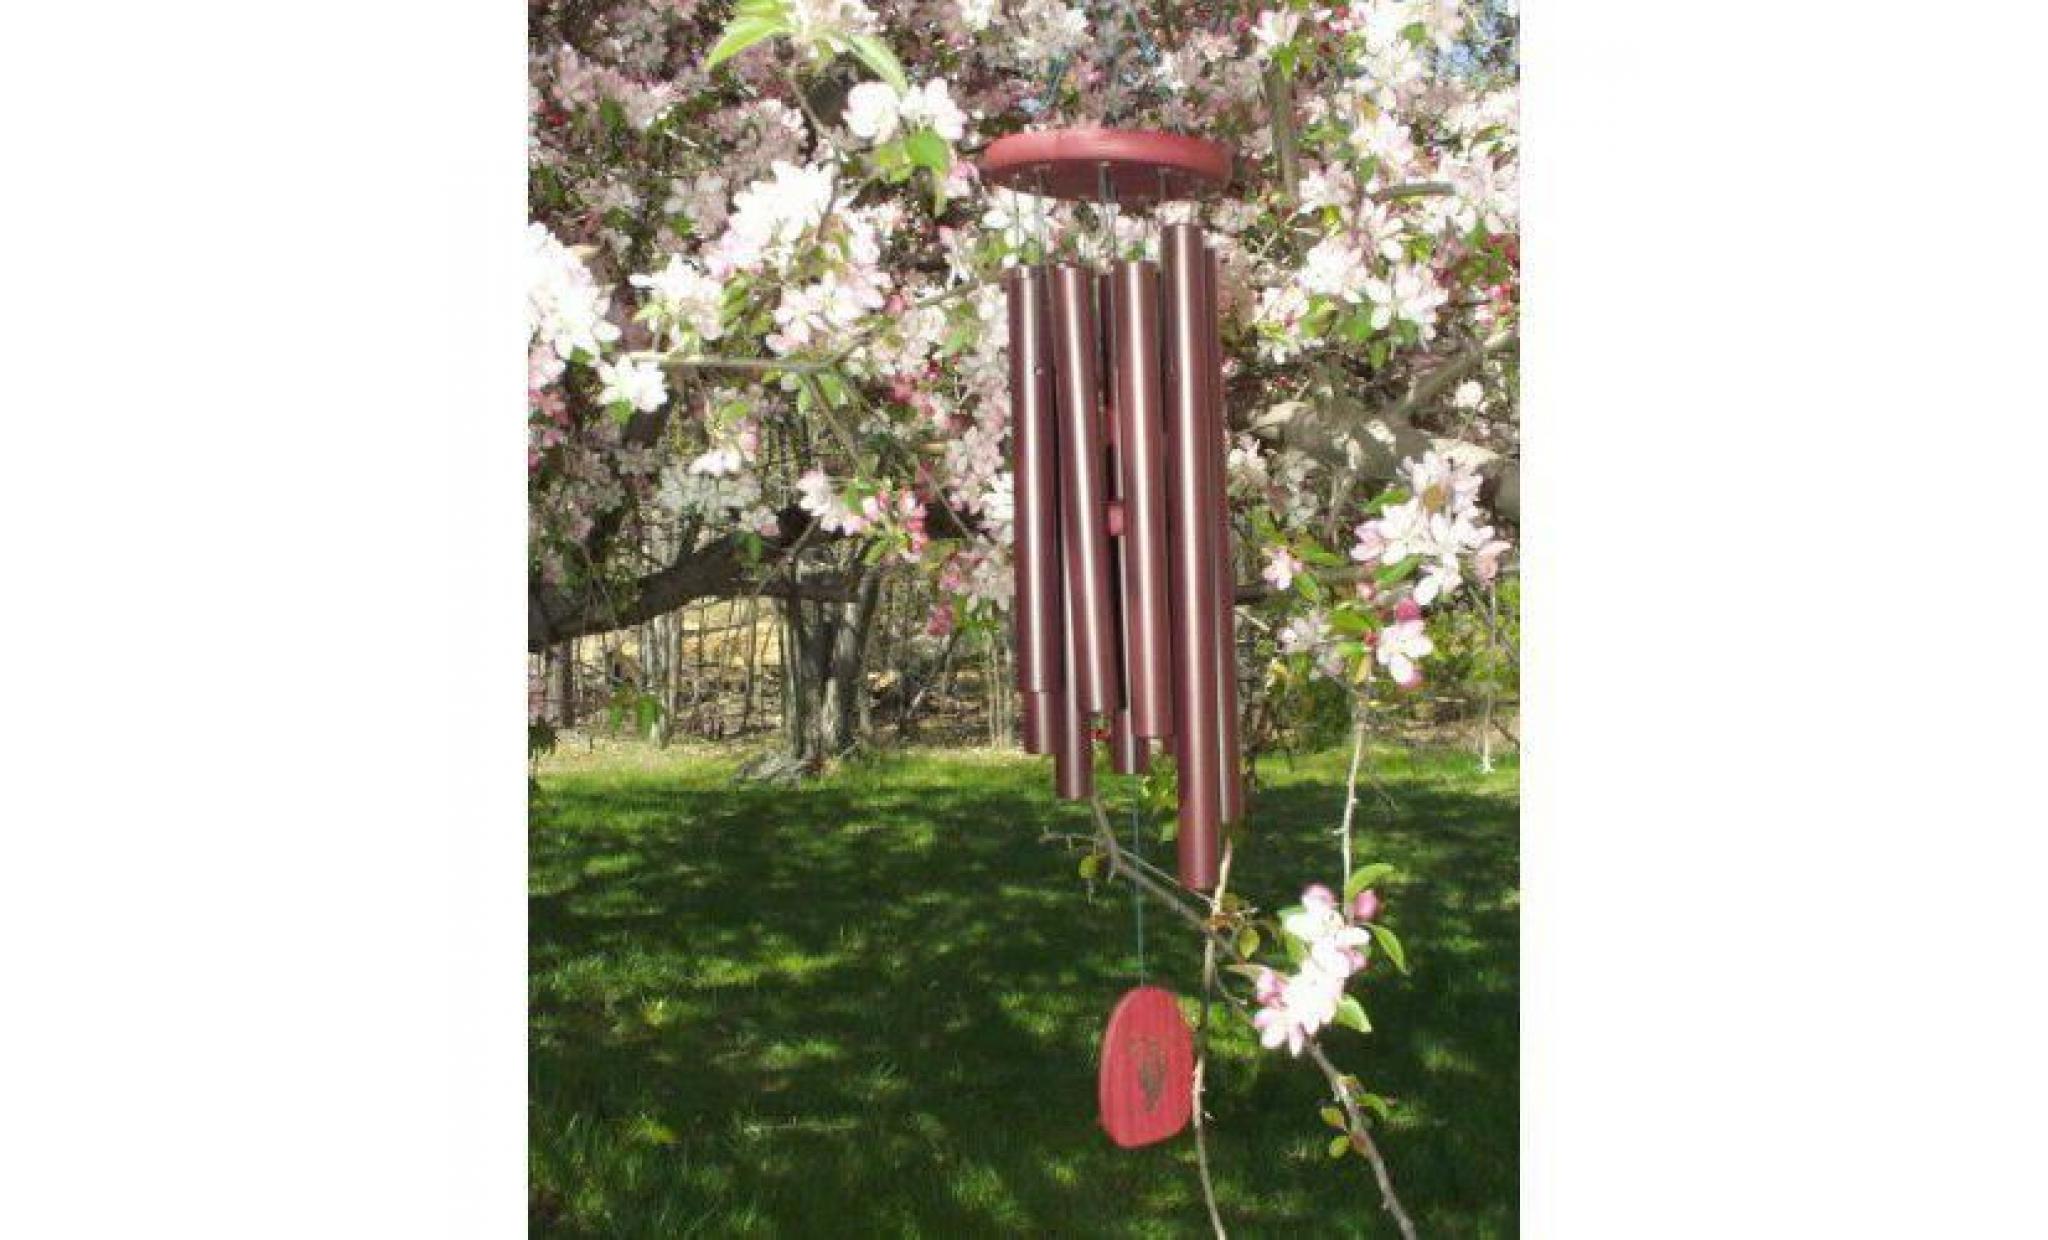 woodstock chimes cts   ustensiles de decoration    chimes of tuscany carillon éolien